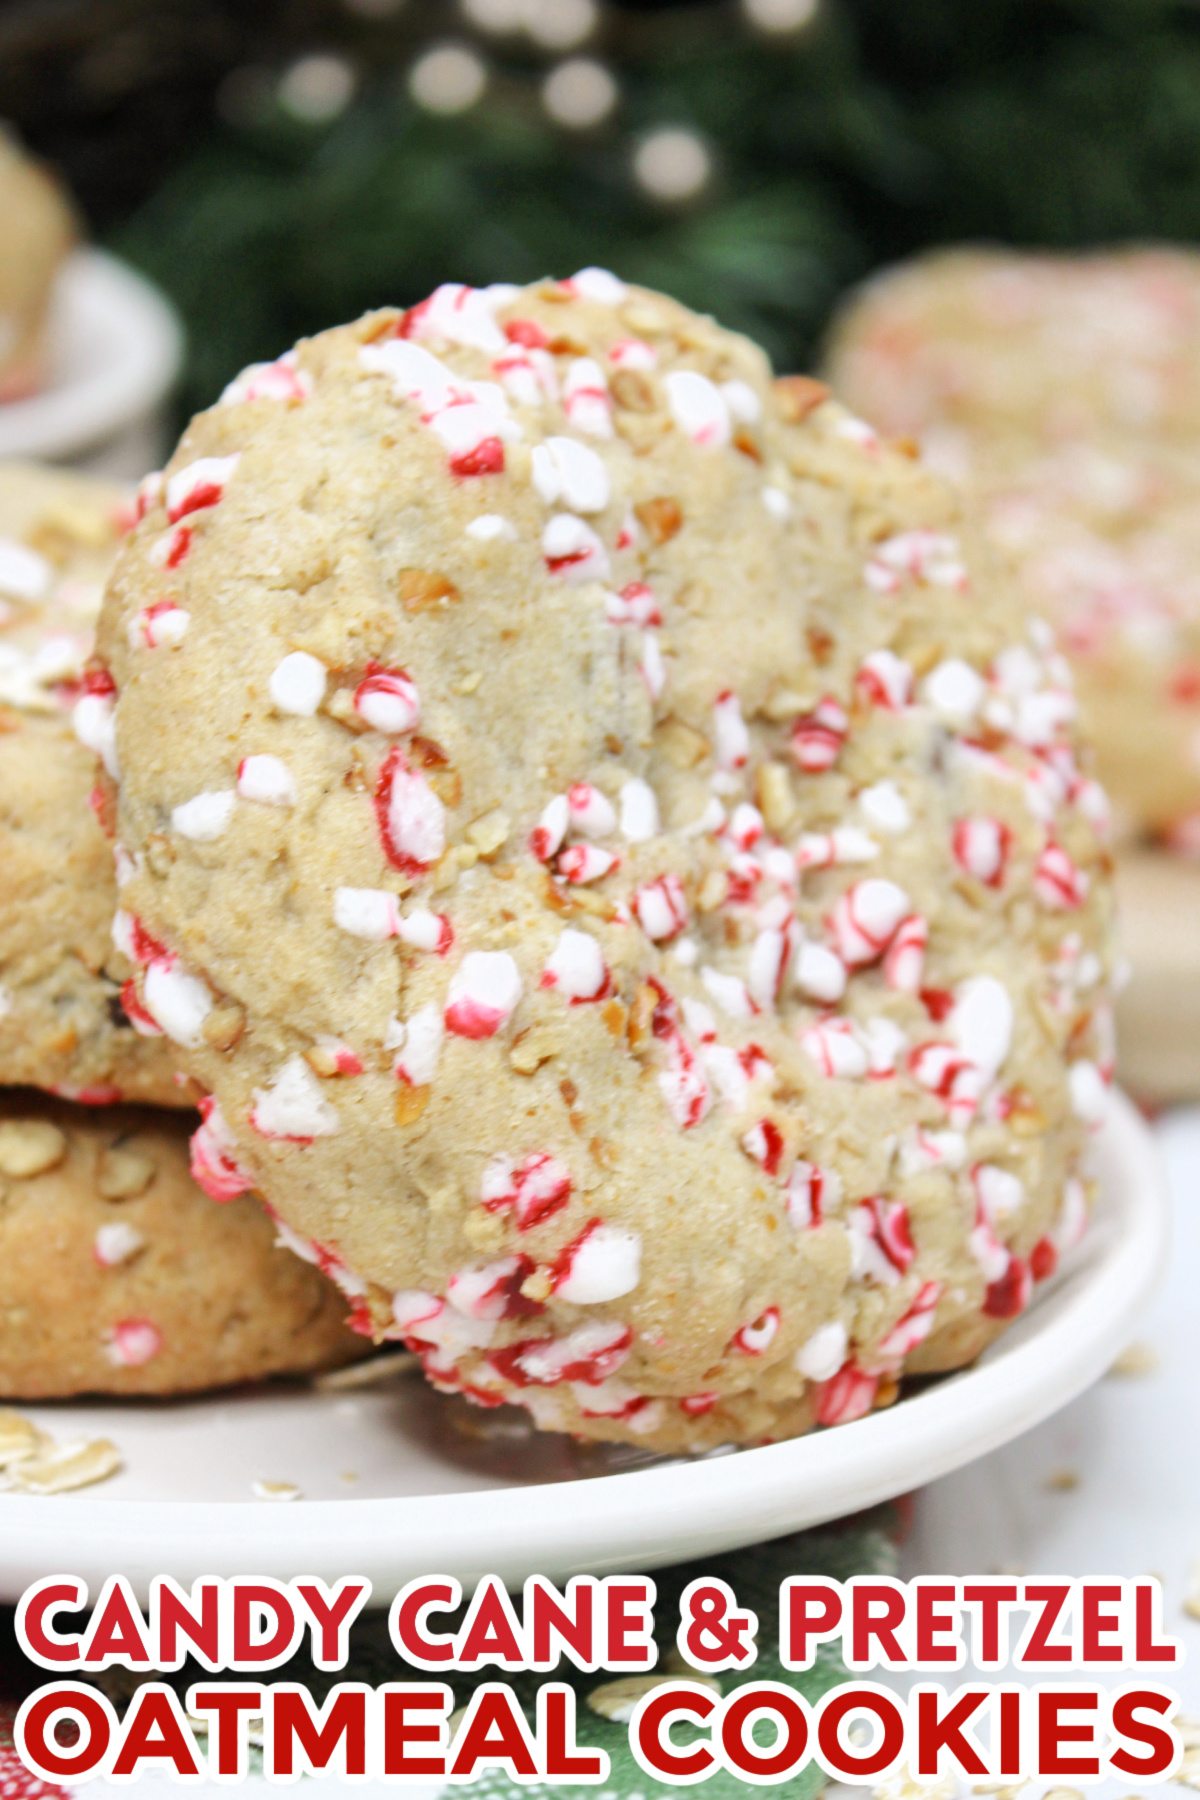 These Candy Cane & Pretzel Oatmeal Cookies are a perfect addition to your holiday cookie platter. They're easy, festive and so pretty too.